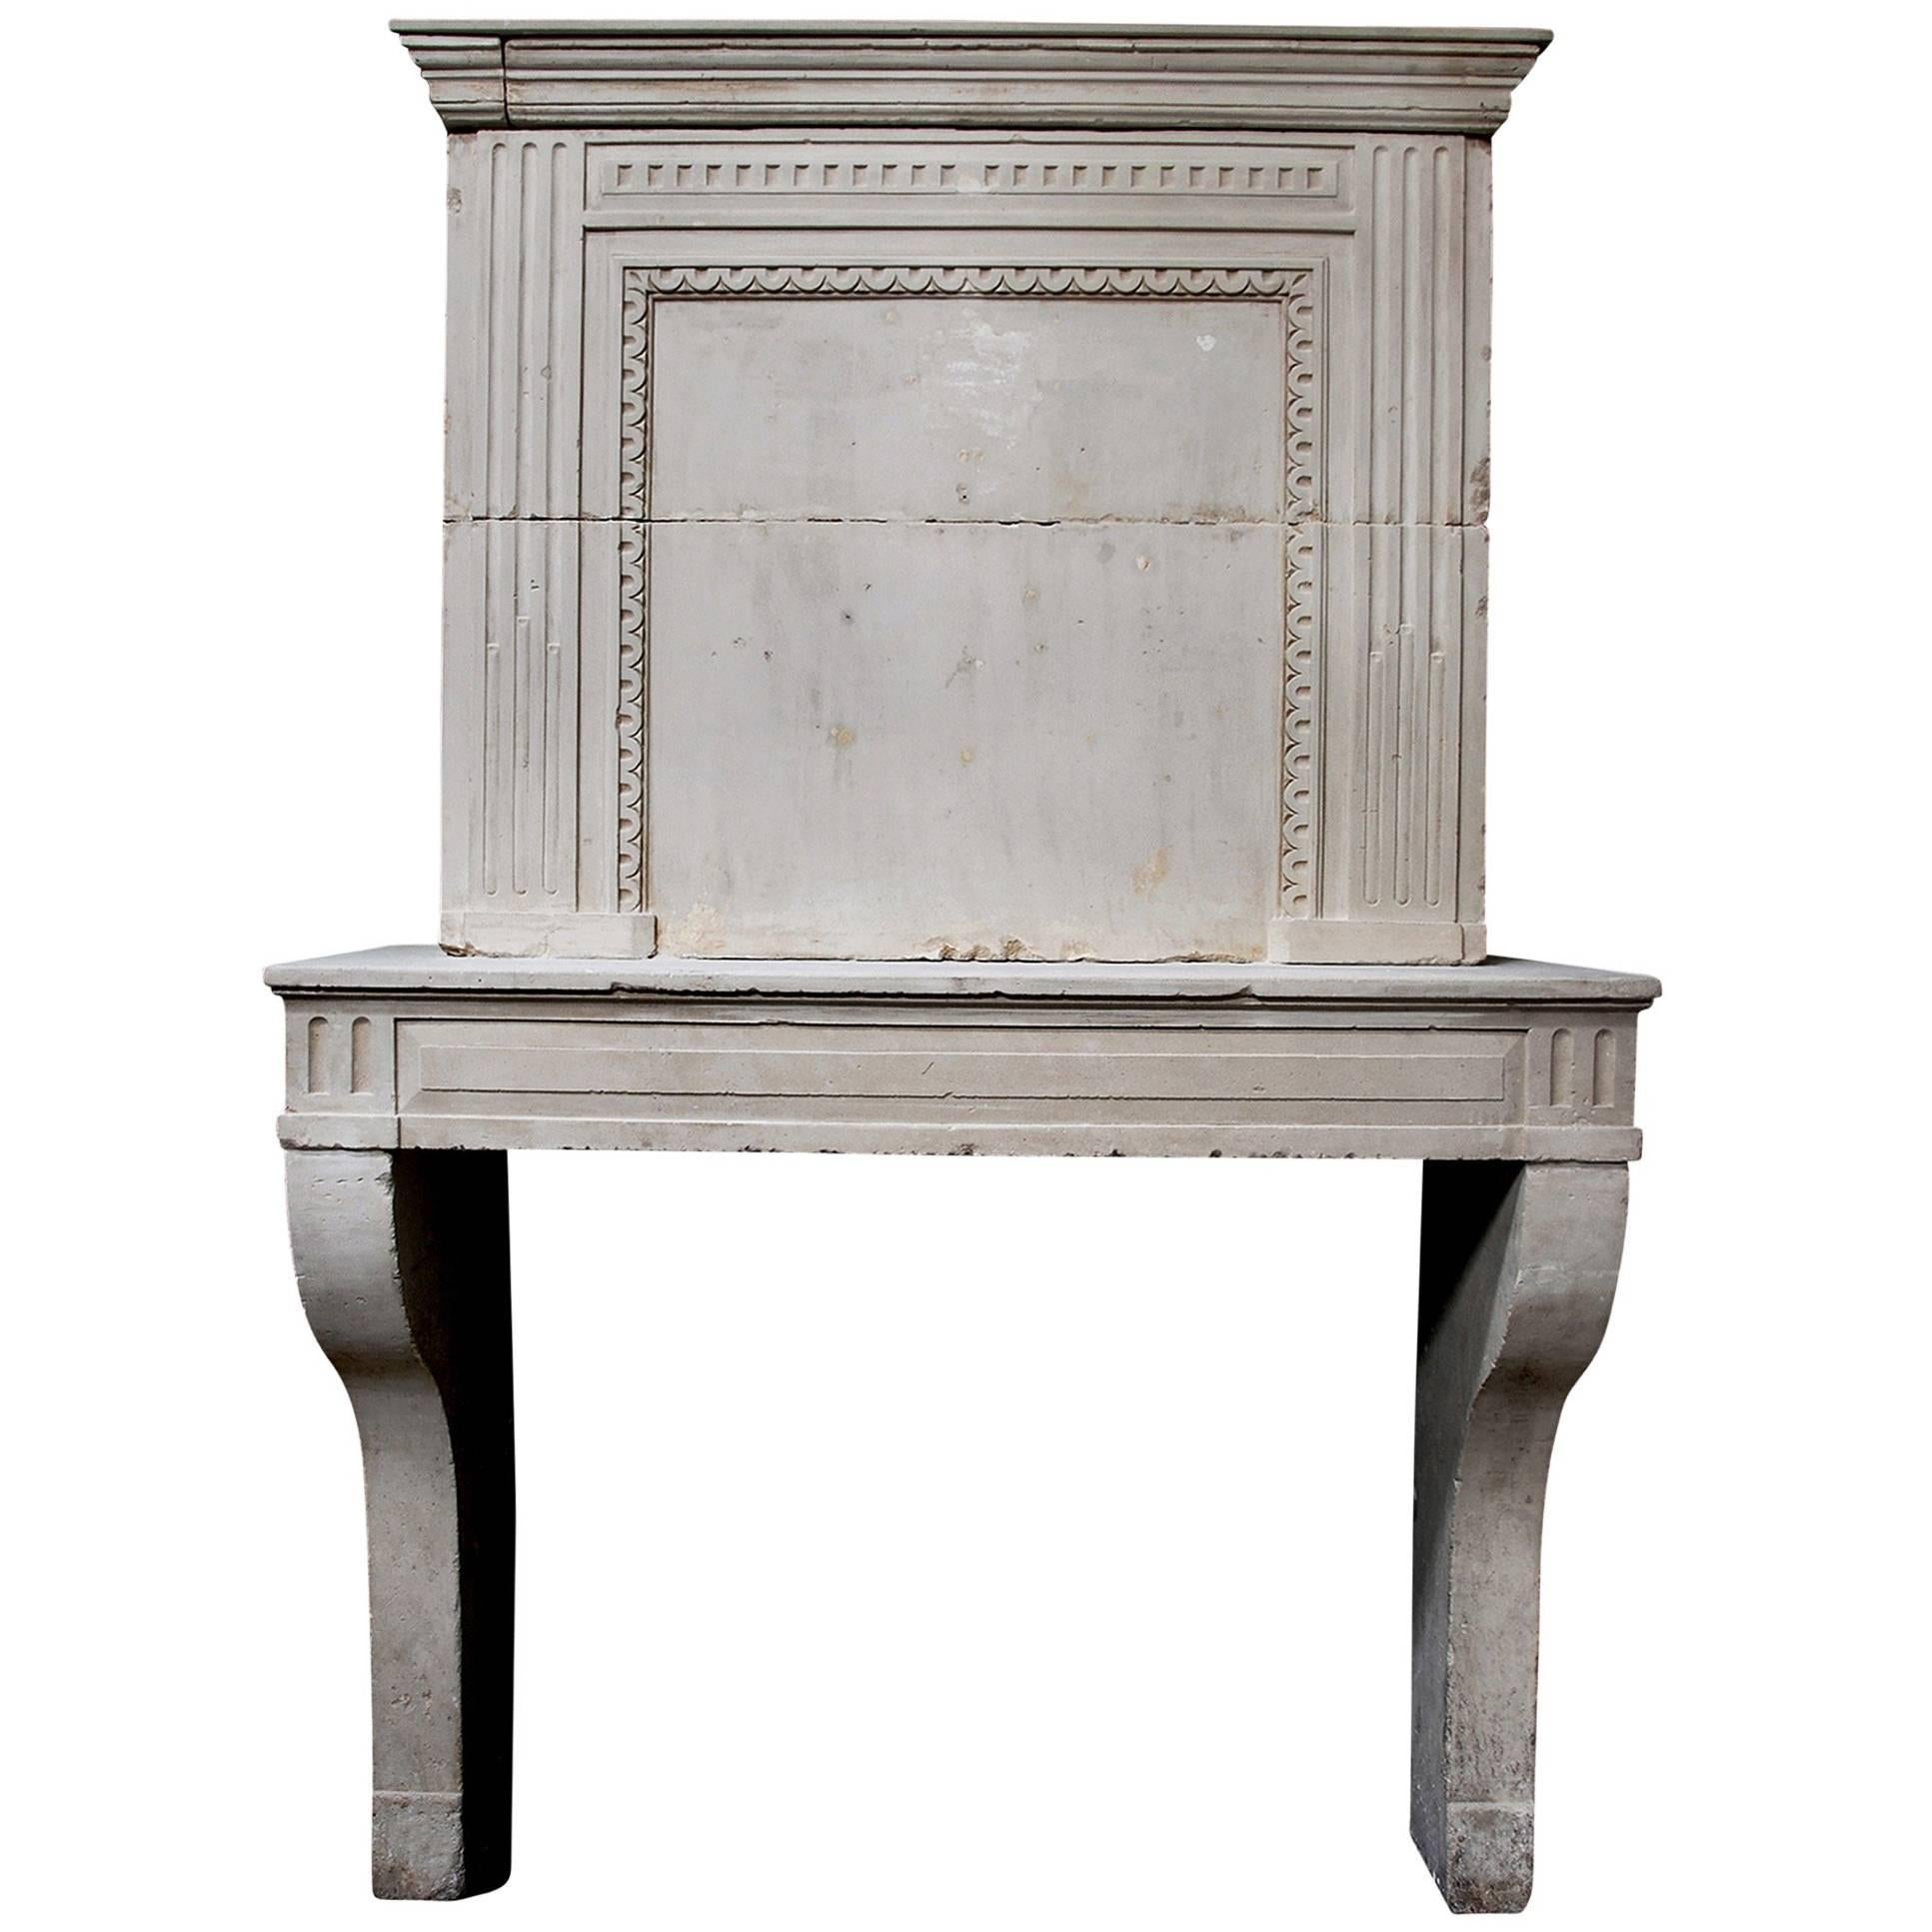 Late 18th Century French Louis XVI Limestone Fireplace with Trumeau